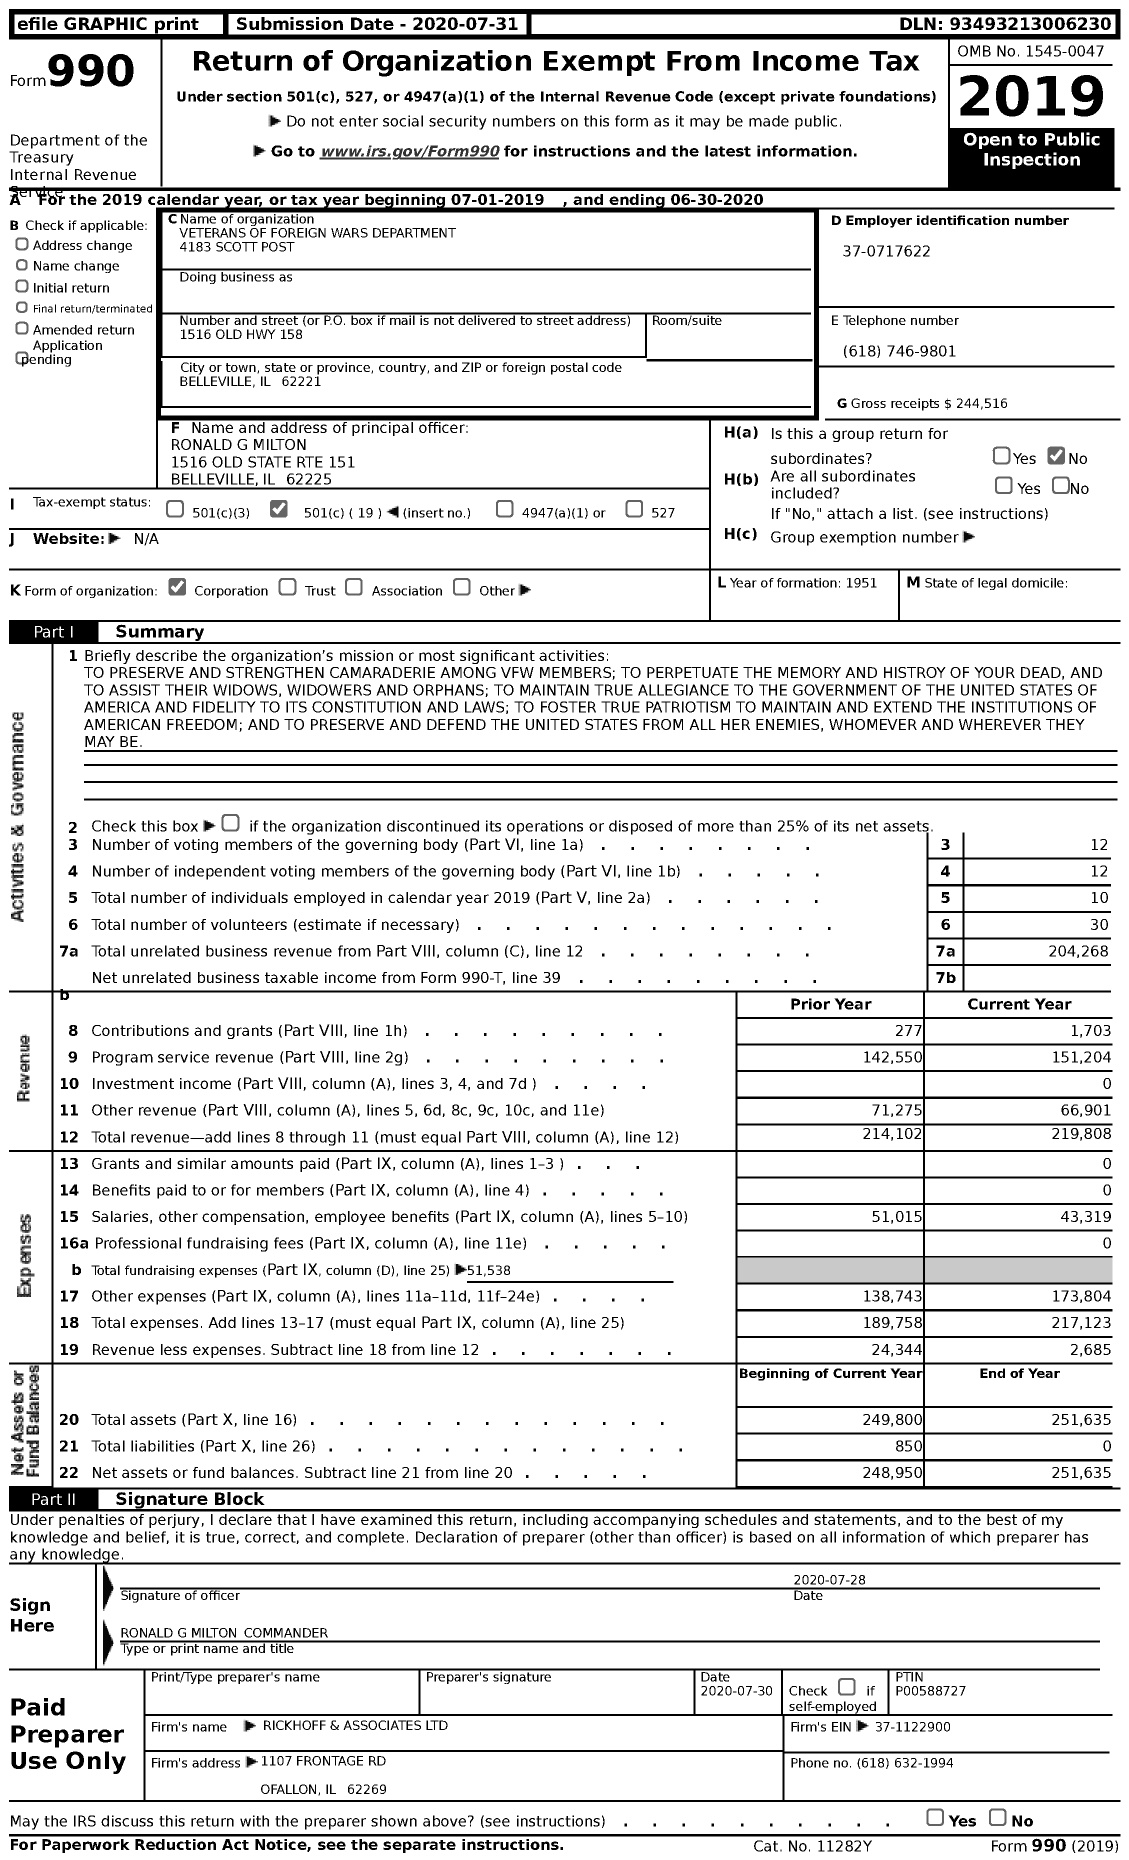 Image of first page of 2019 Form 990 for VFW Dept of Illinois - 4183 Scott Post